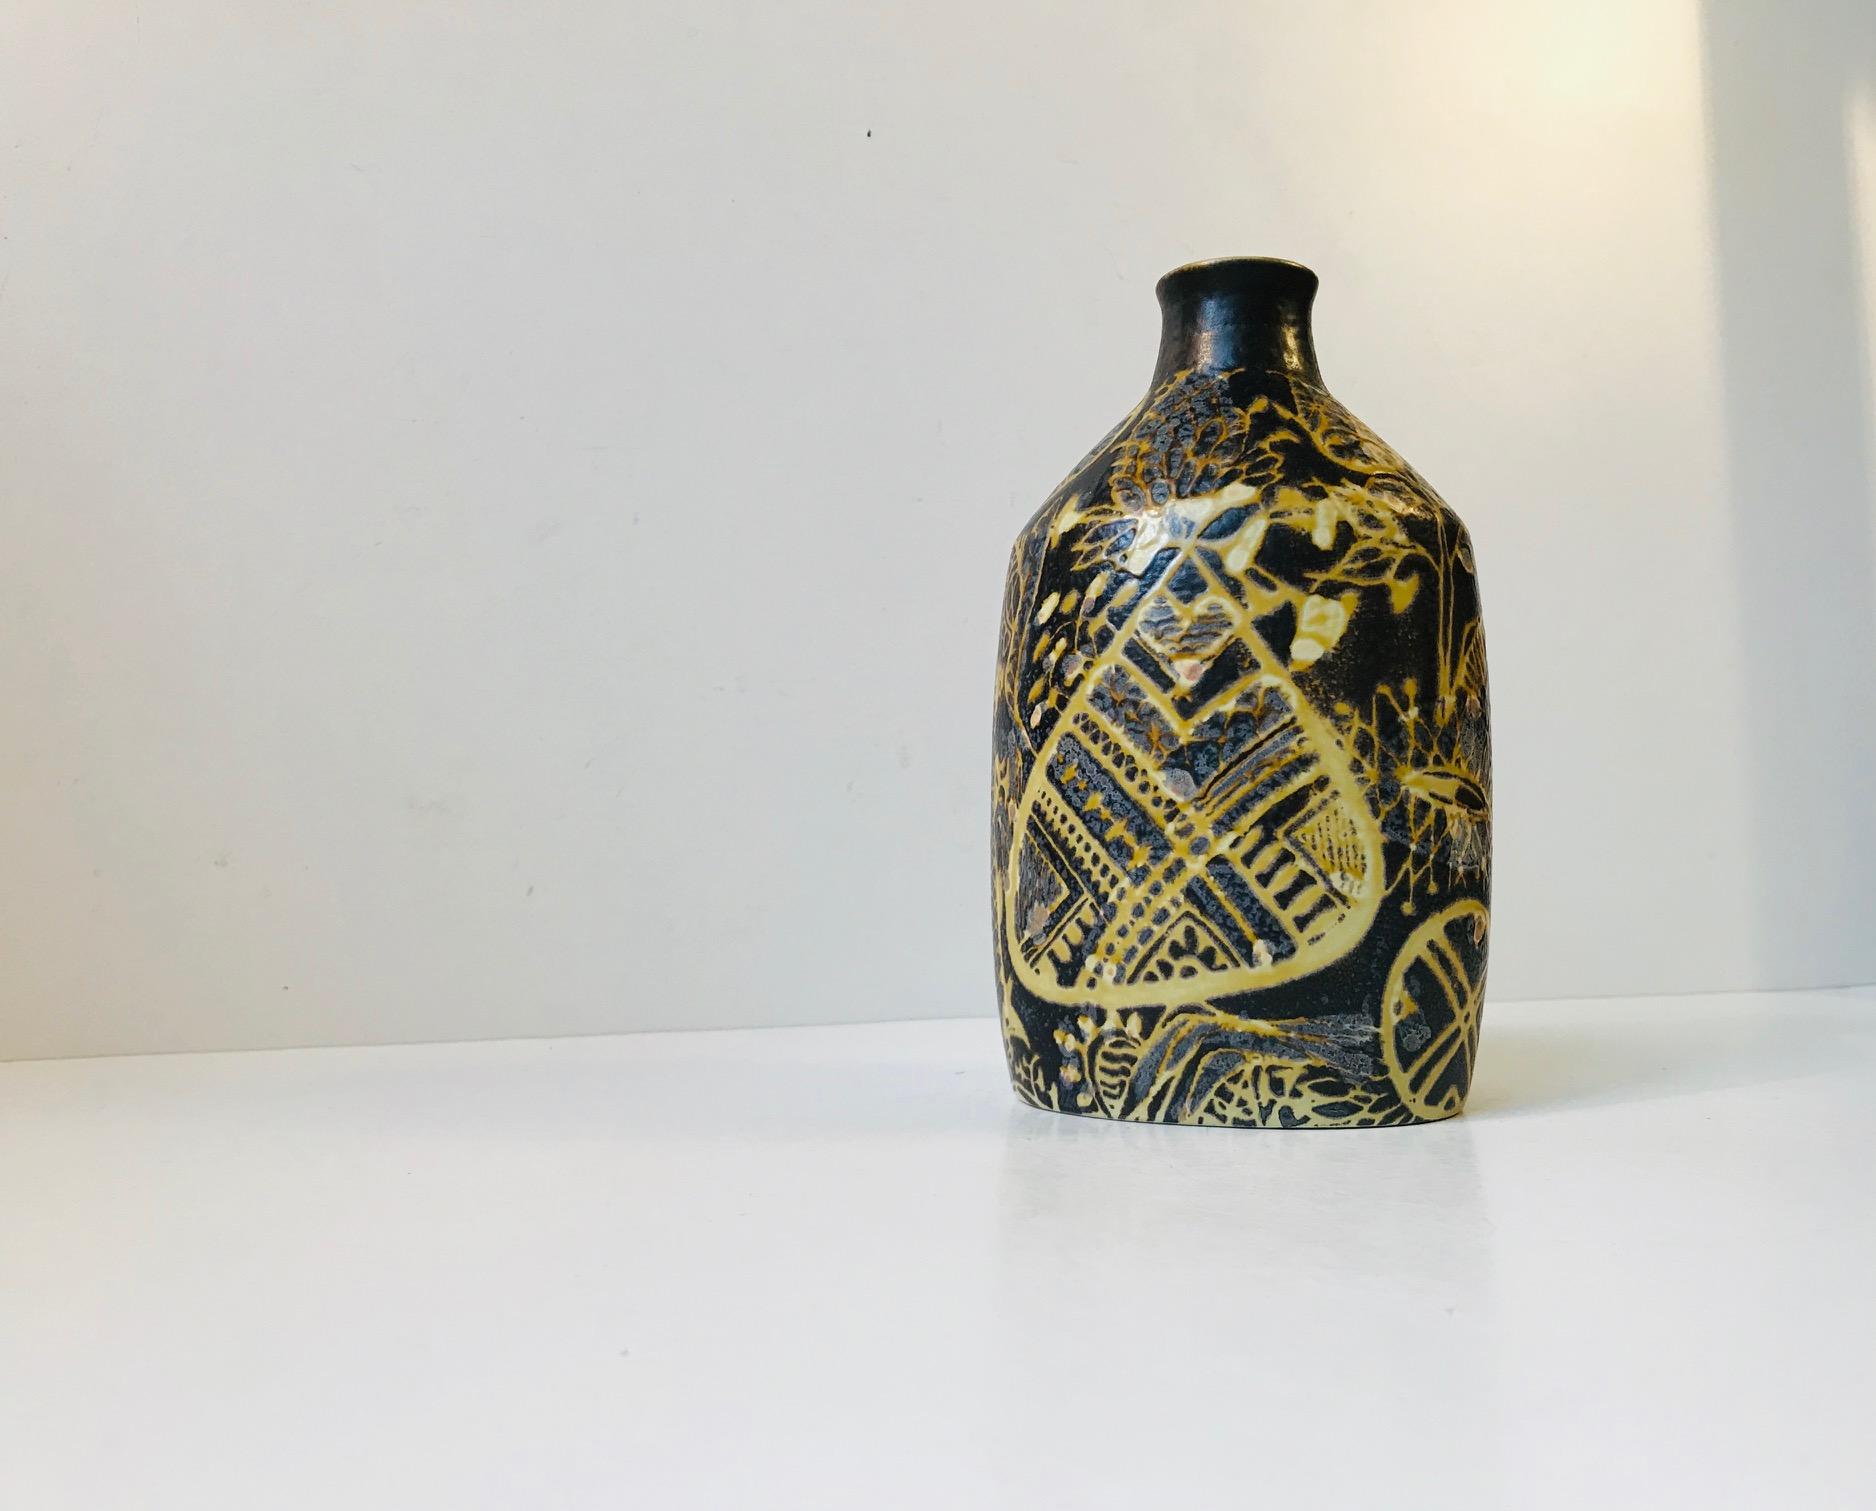 - This ceramic vase was designed by Nils Thorsson and manufactured by Royal Copenhagen in Denmark.
- Decorated in black, yellow and earthy glazes with an abstract motif
- Model number 723/3208
- Marked to the base with the initials of the